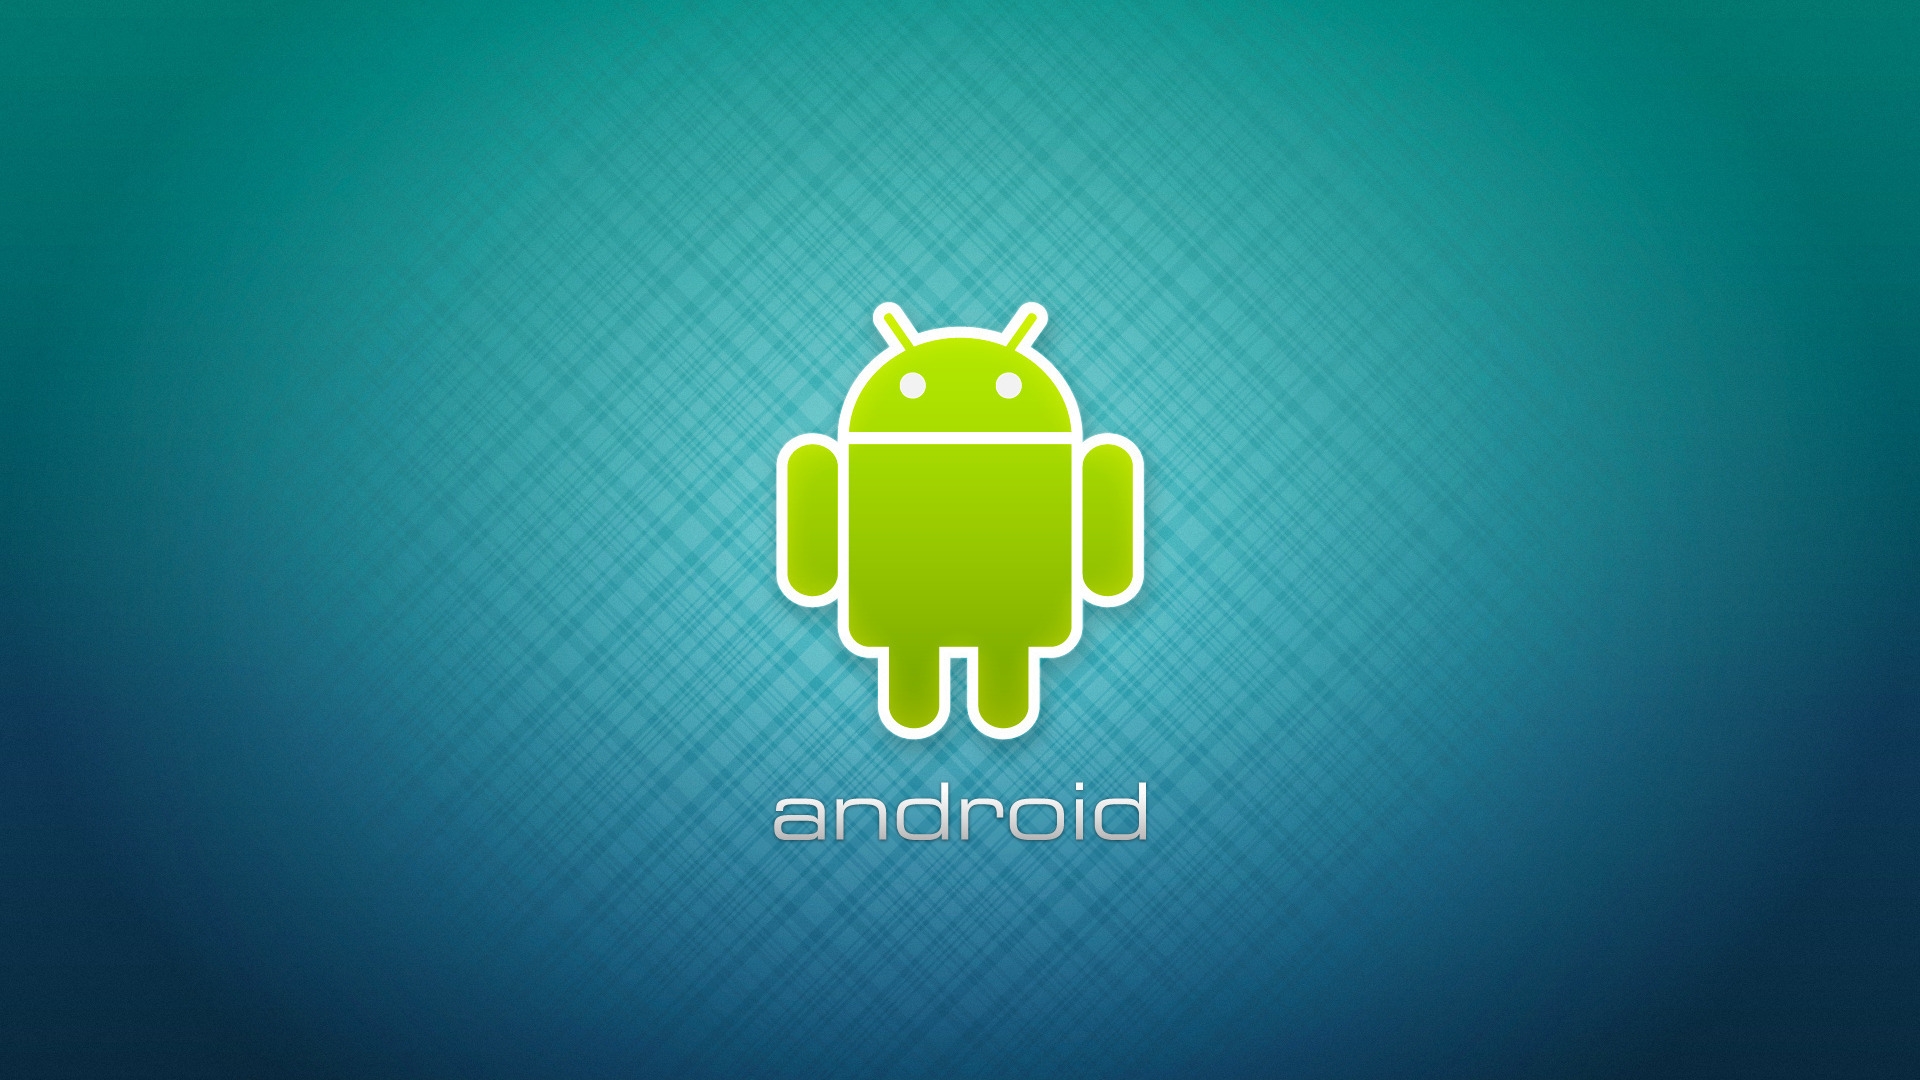 Just Android Logo Hq Wallpaper High Quality